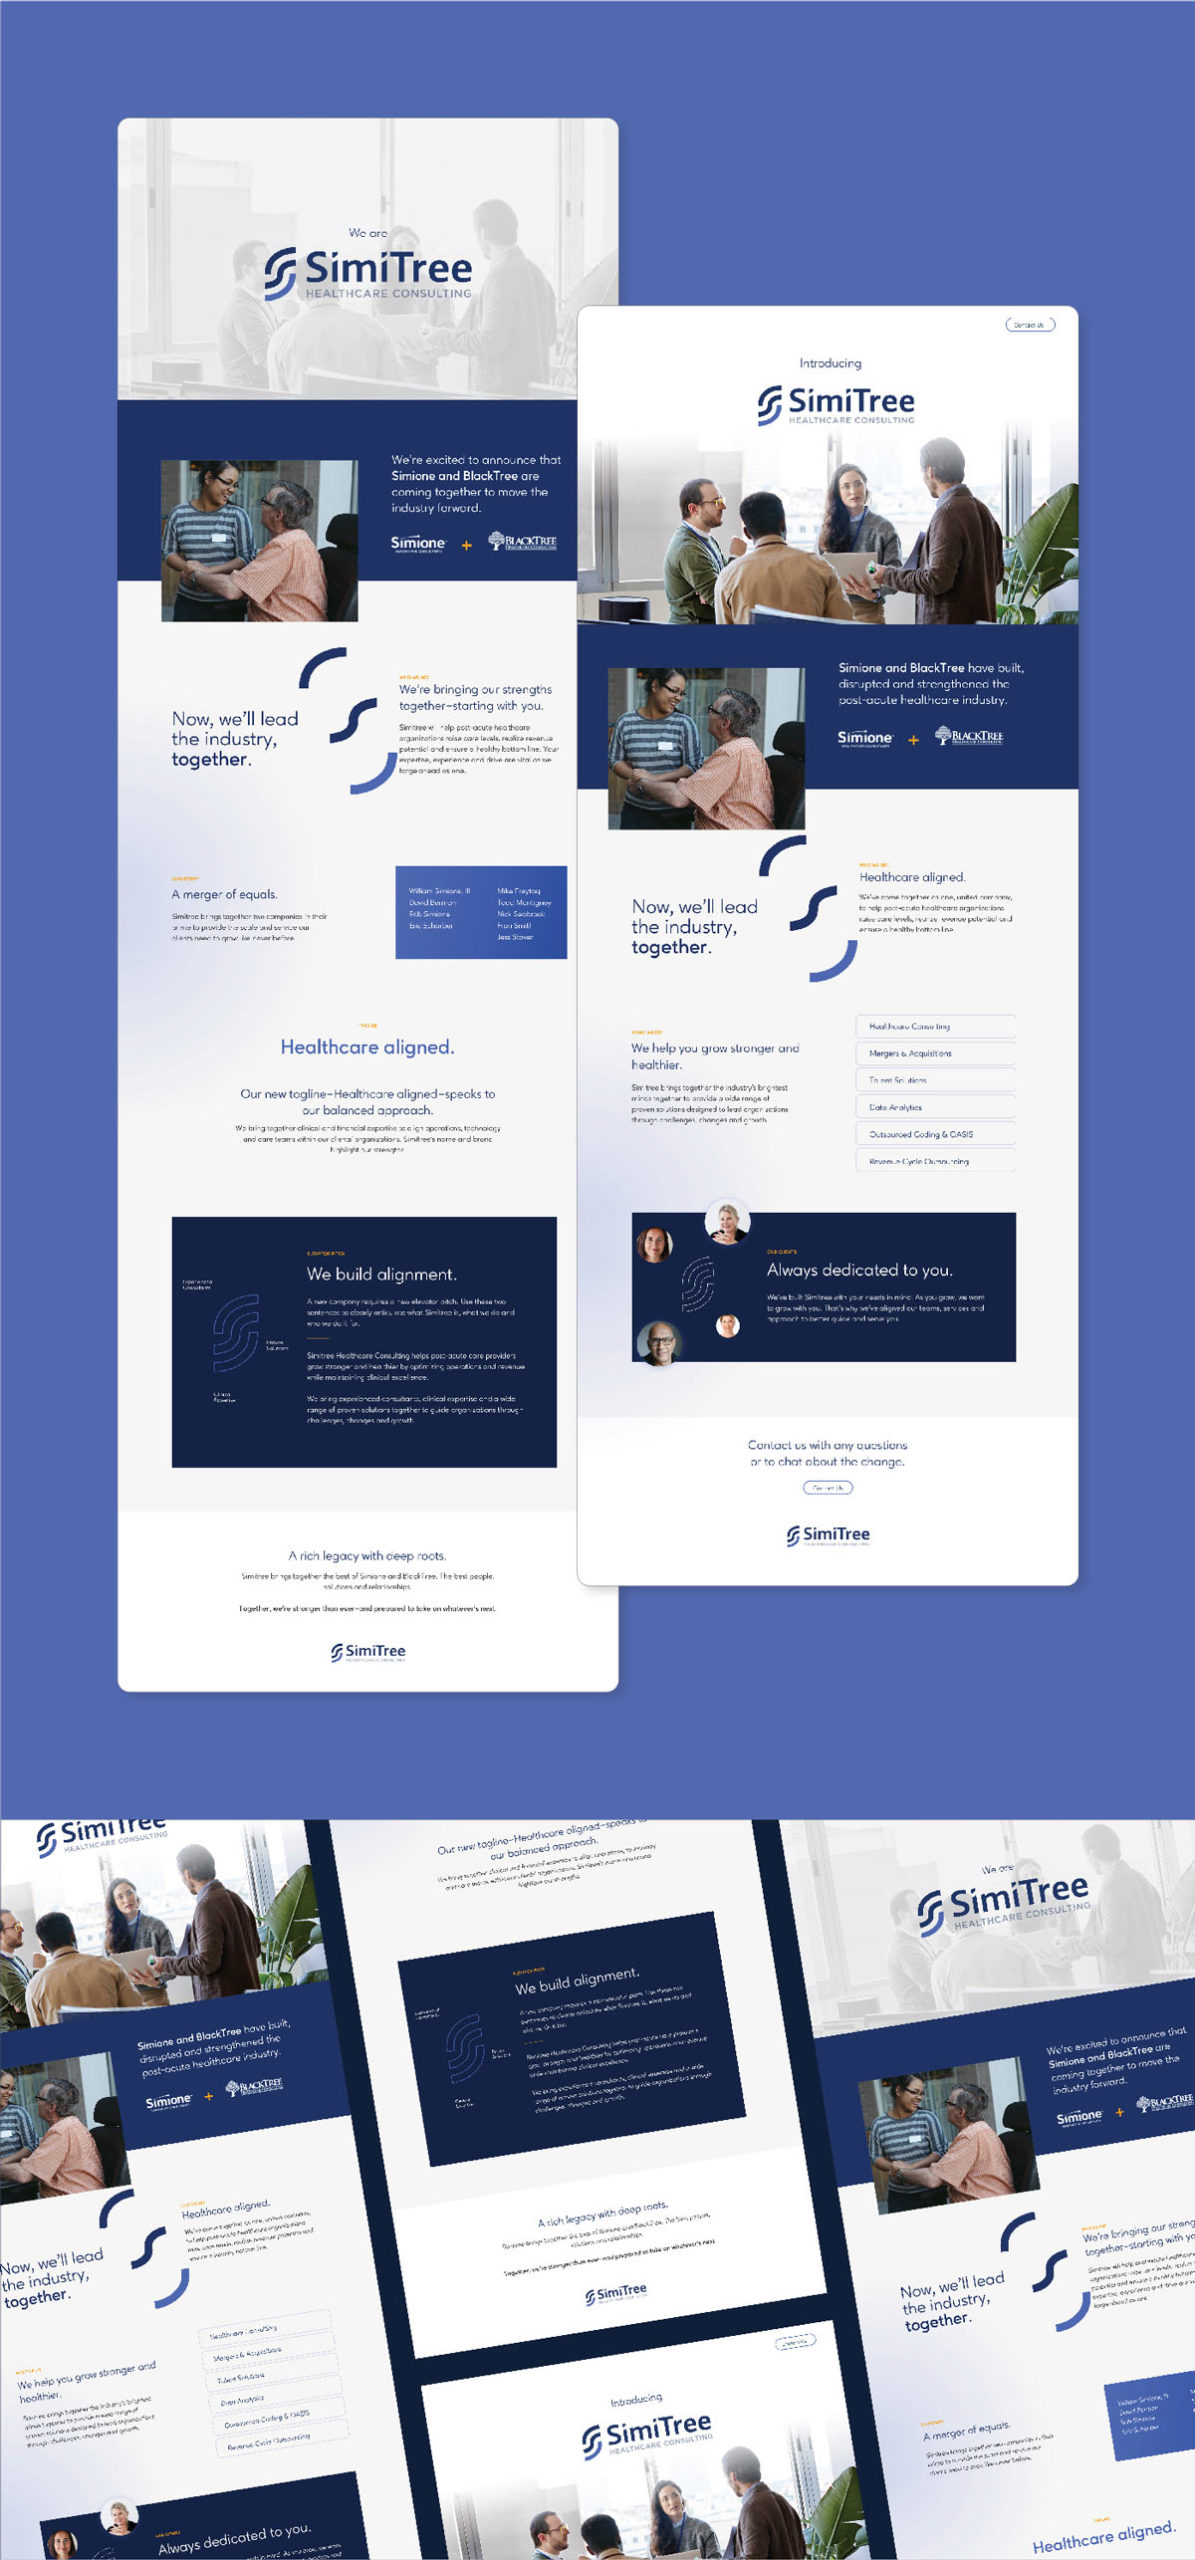 Two SimiTree landing pages launched during the healthcare merger announcement